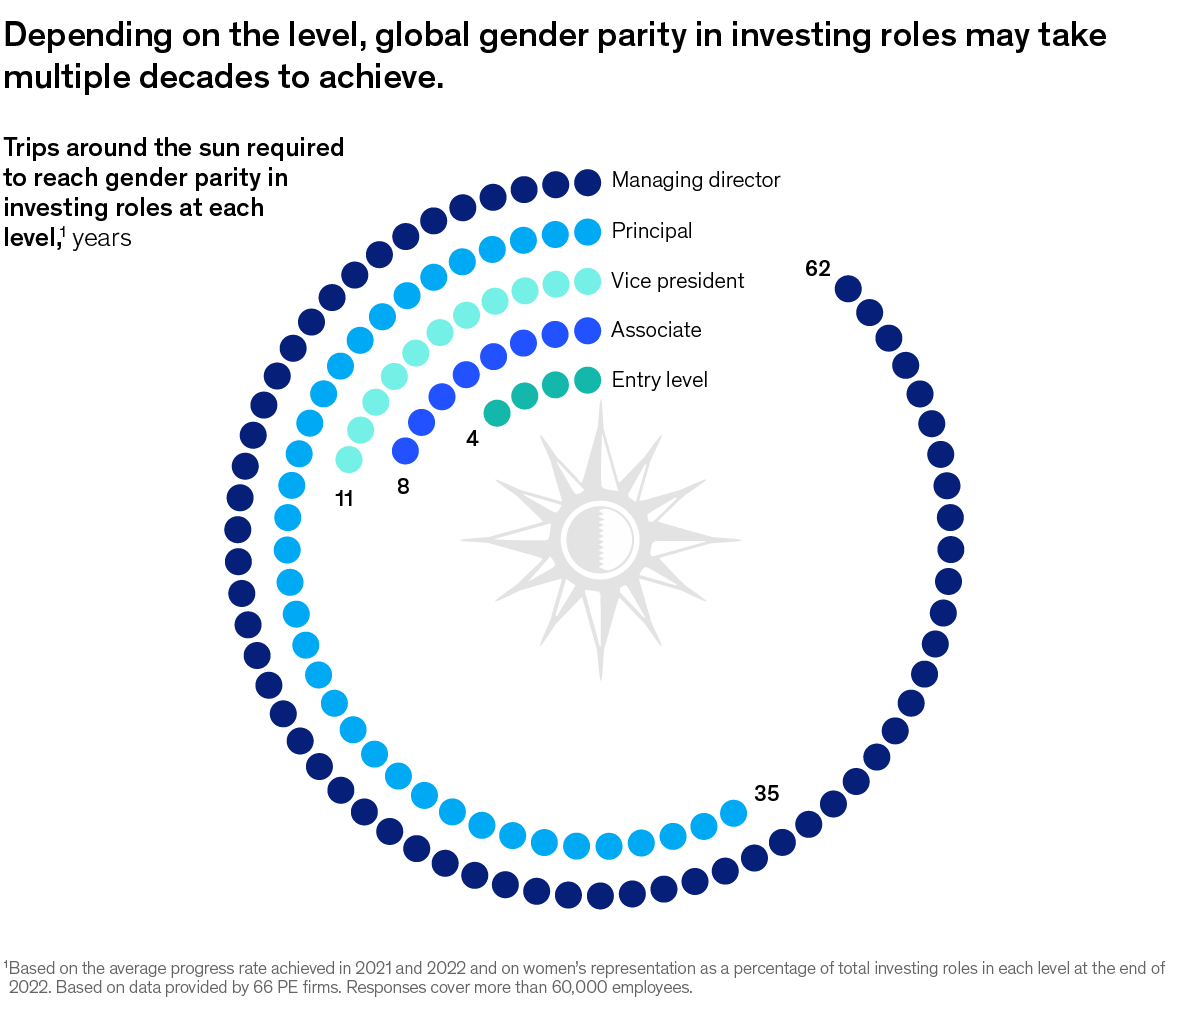 A chart titled “Depending on the level, global gender parity in investing roles may take multiple decades to achieve.” Click to open the full article on McKinsey.com.